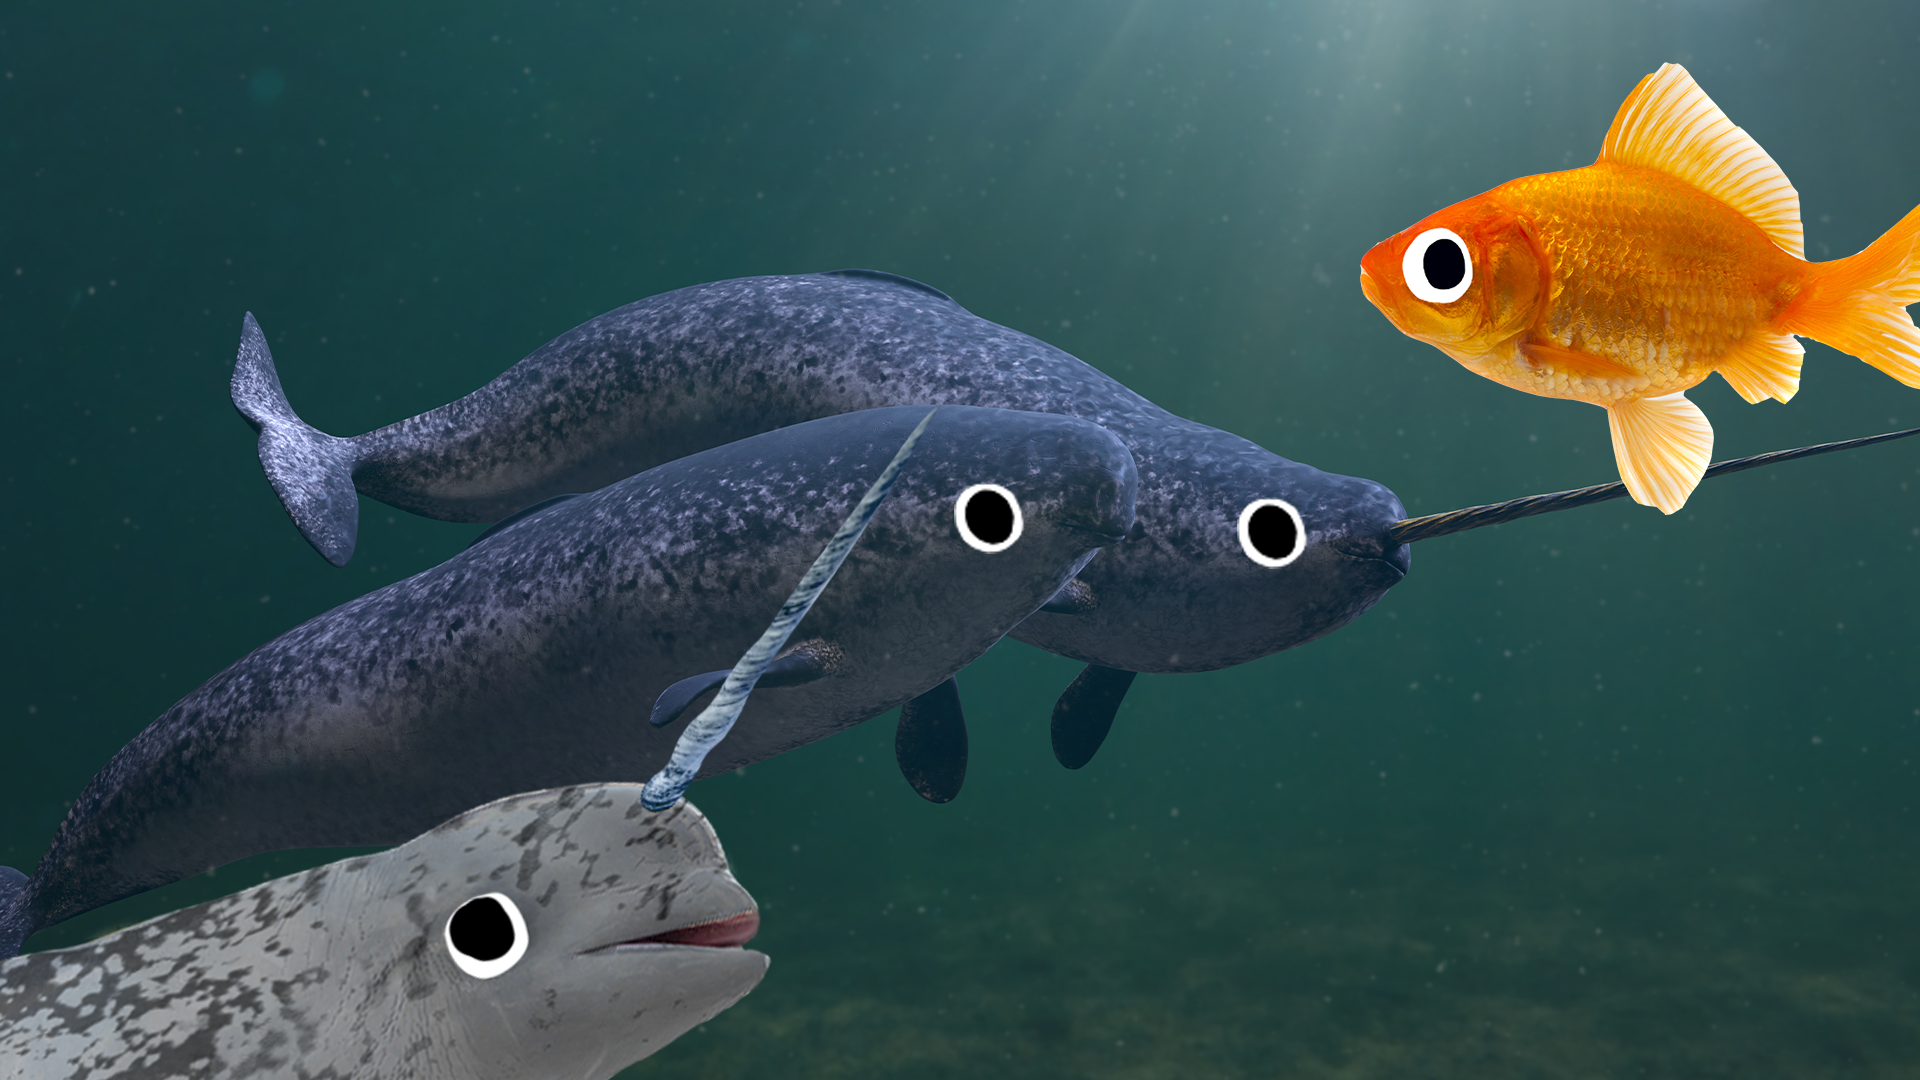 Narwhals and goldfish